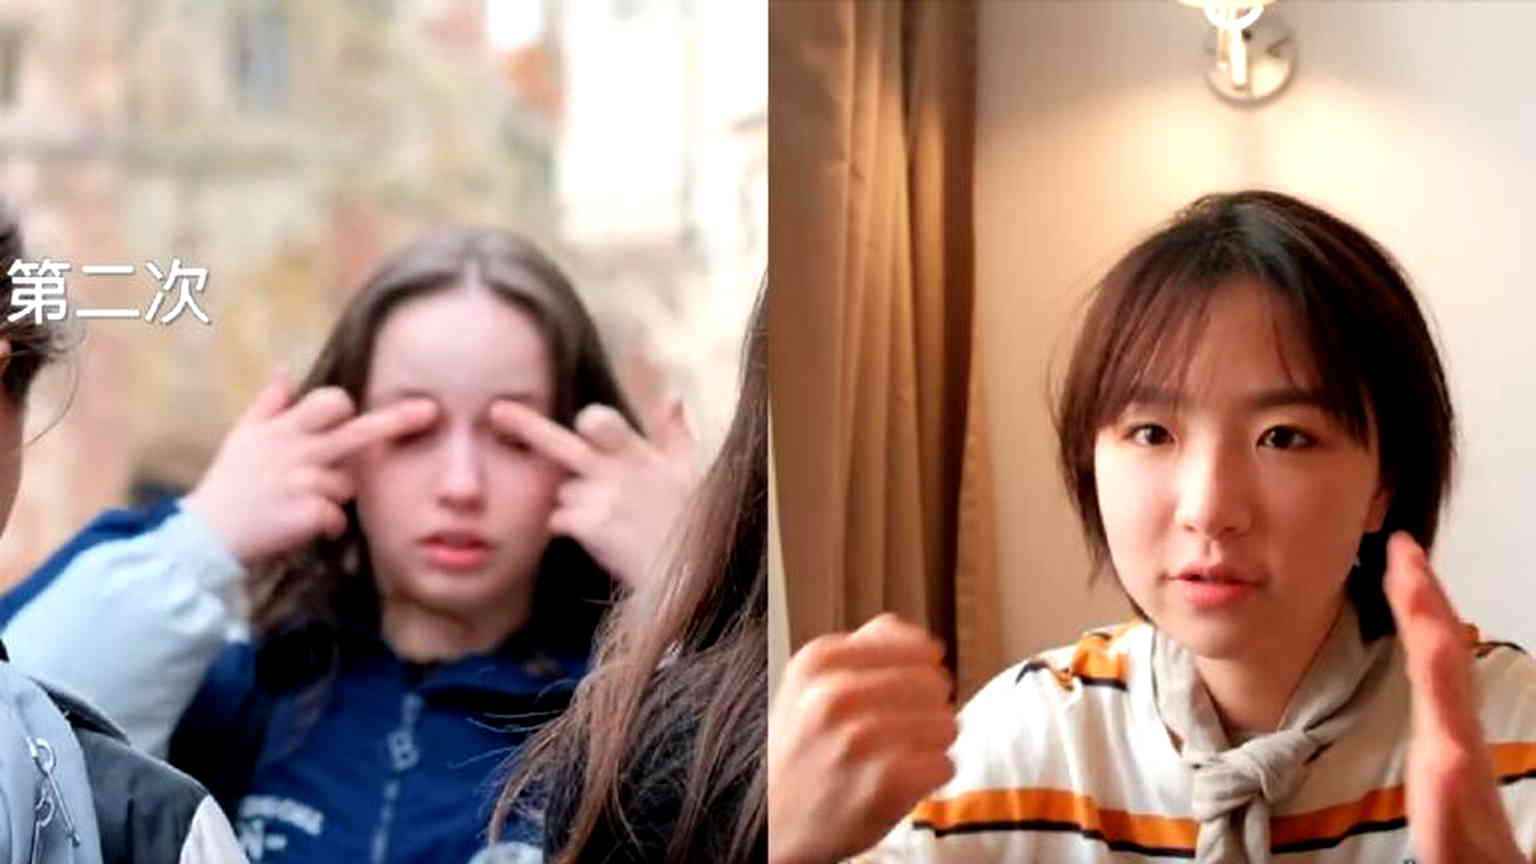 ‘You are not a child anymore’: Chinese vlogger confronts teen over racist gesture